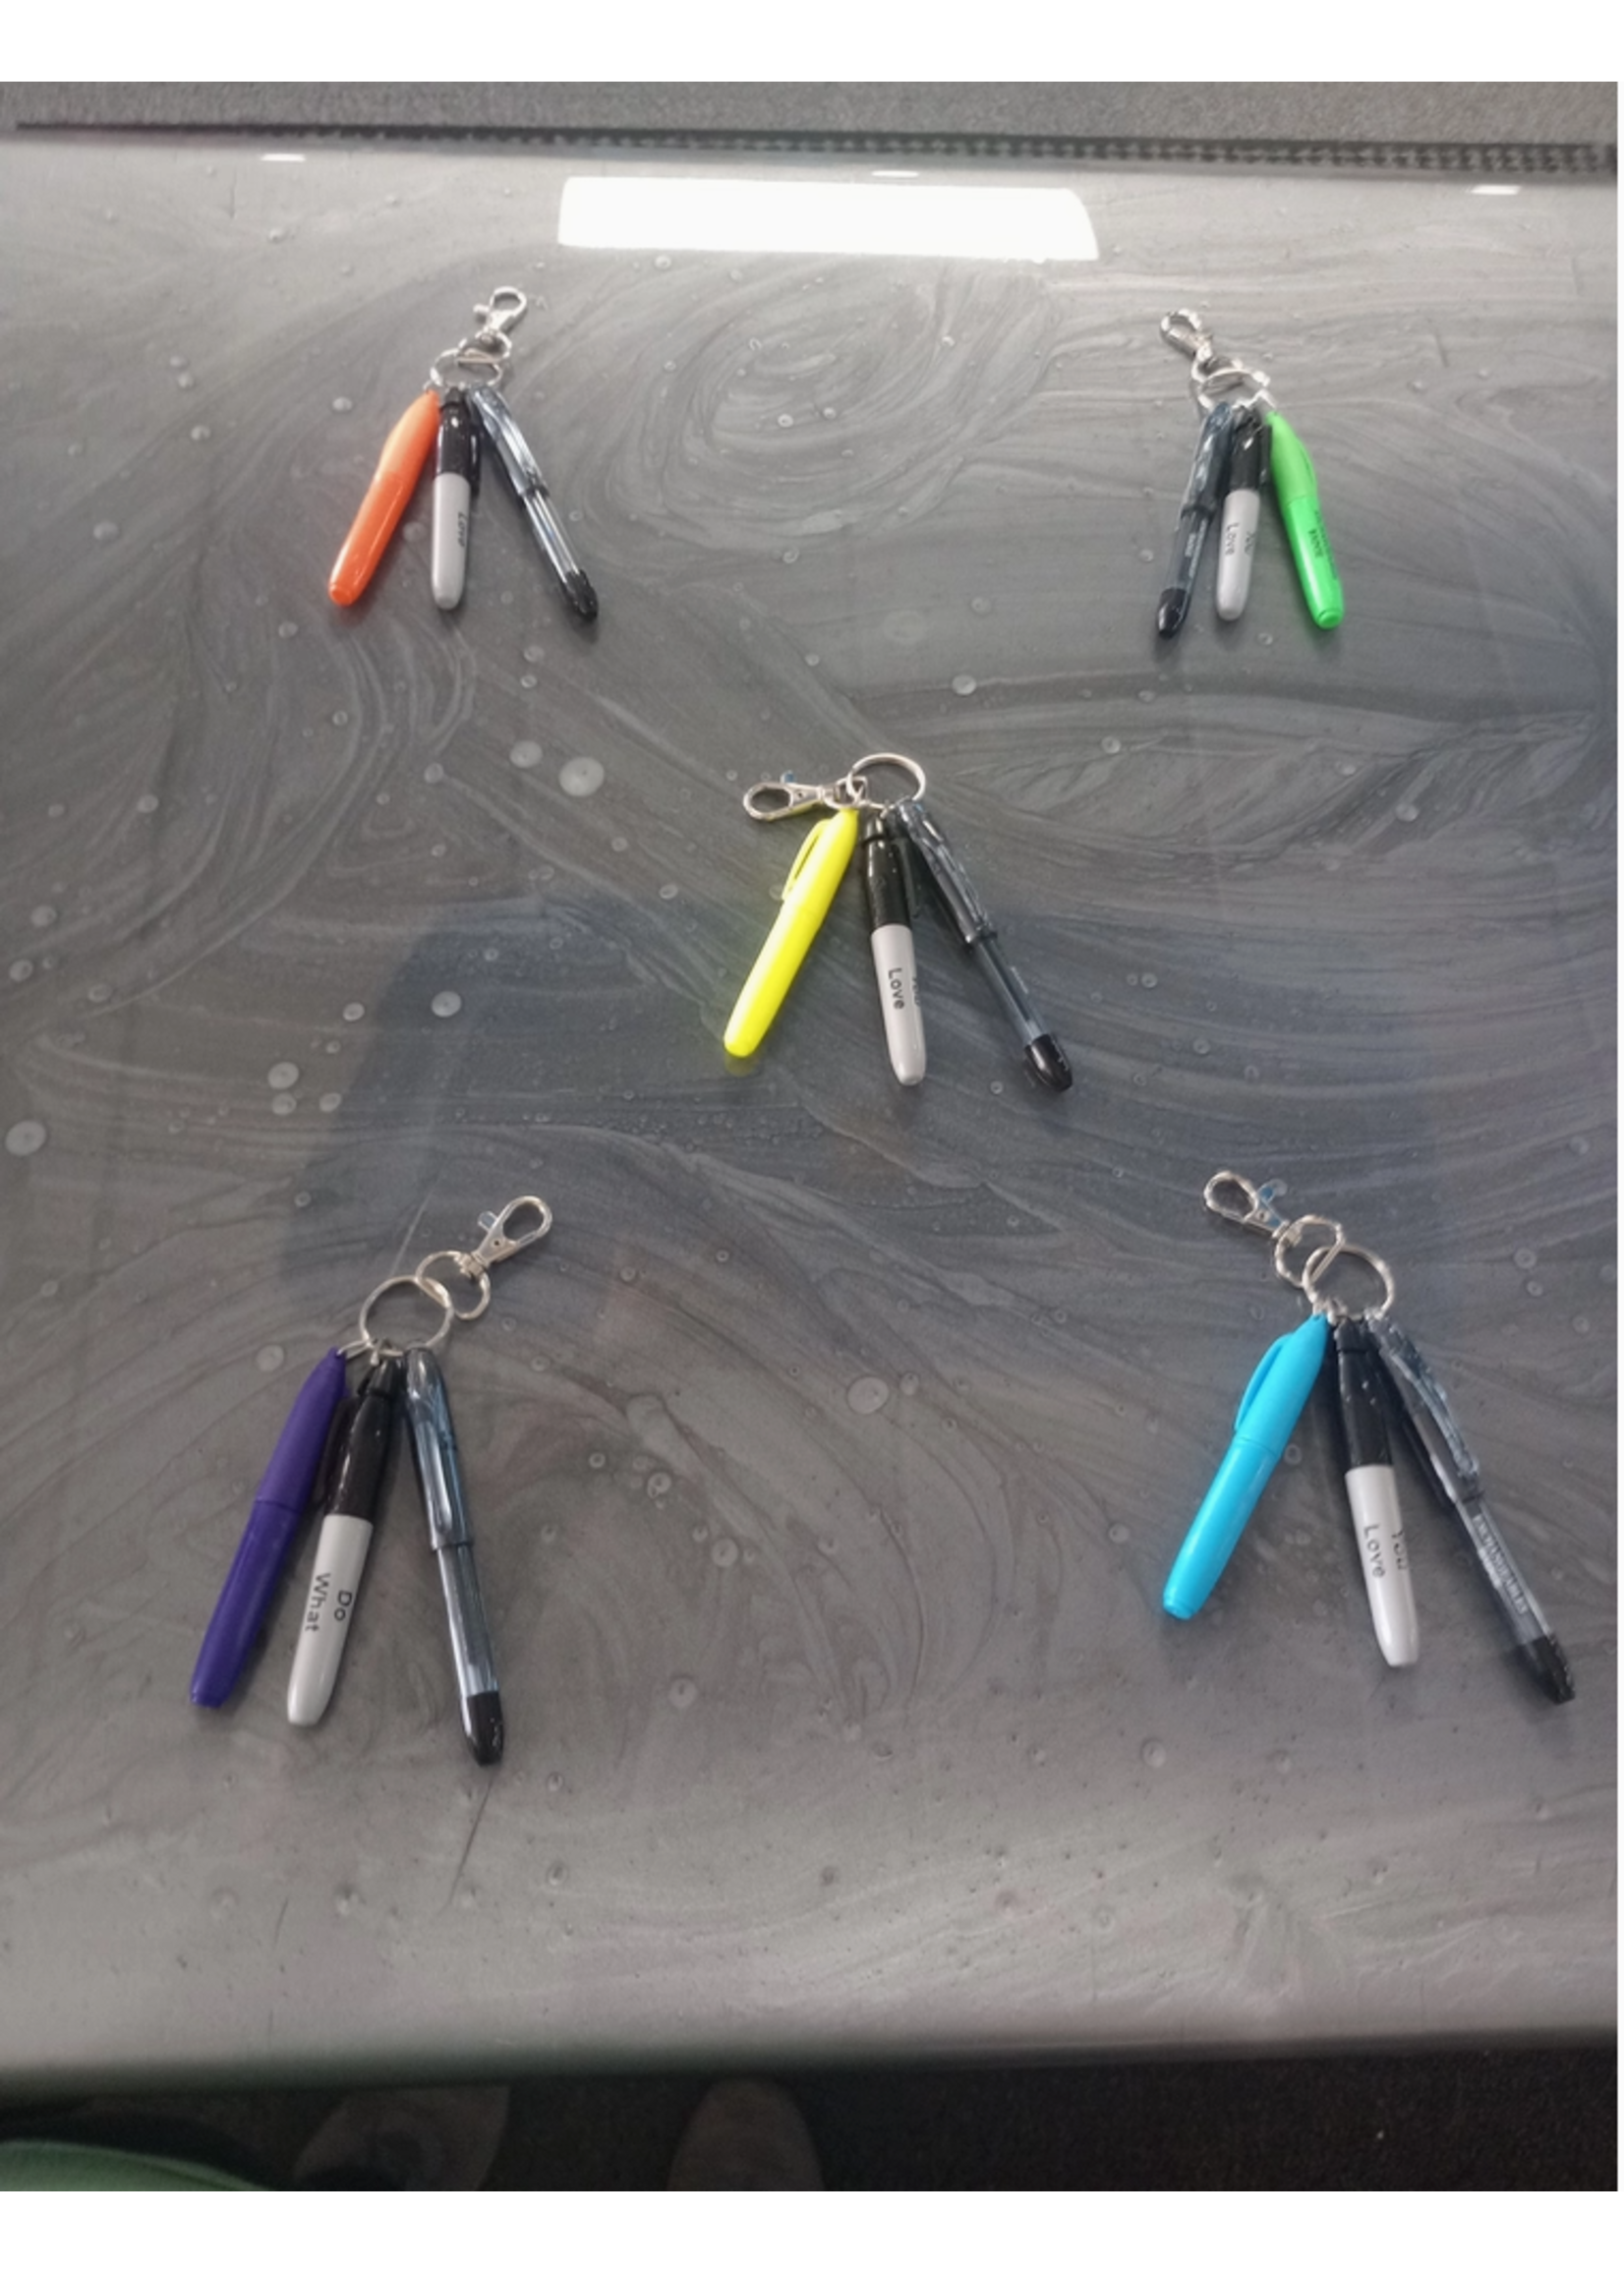 Exchangeables Badge Reels/Faire Mini Sharpie and Highlighter Keychains